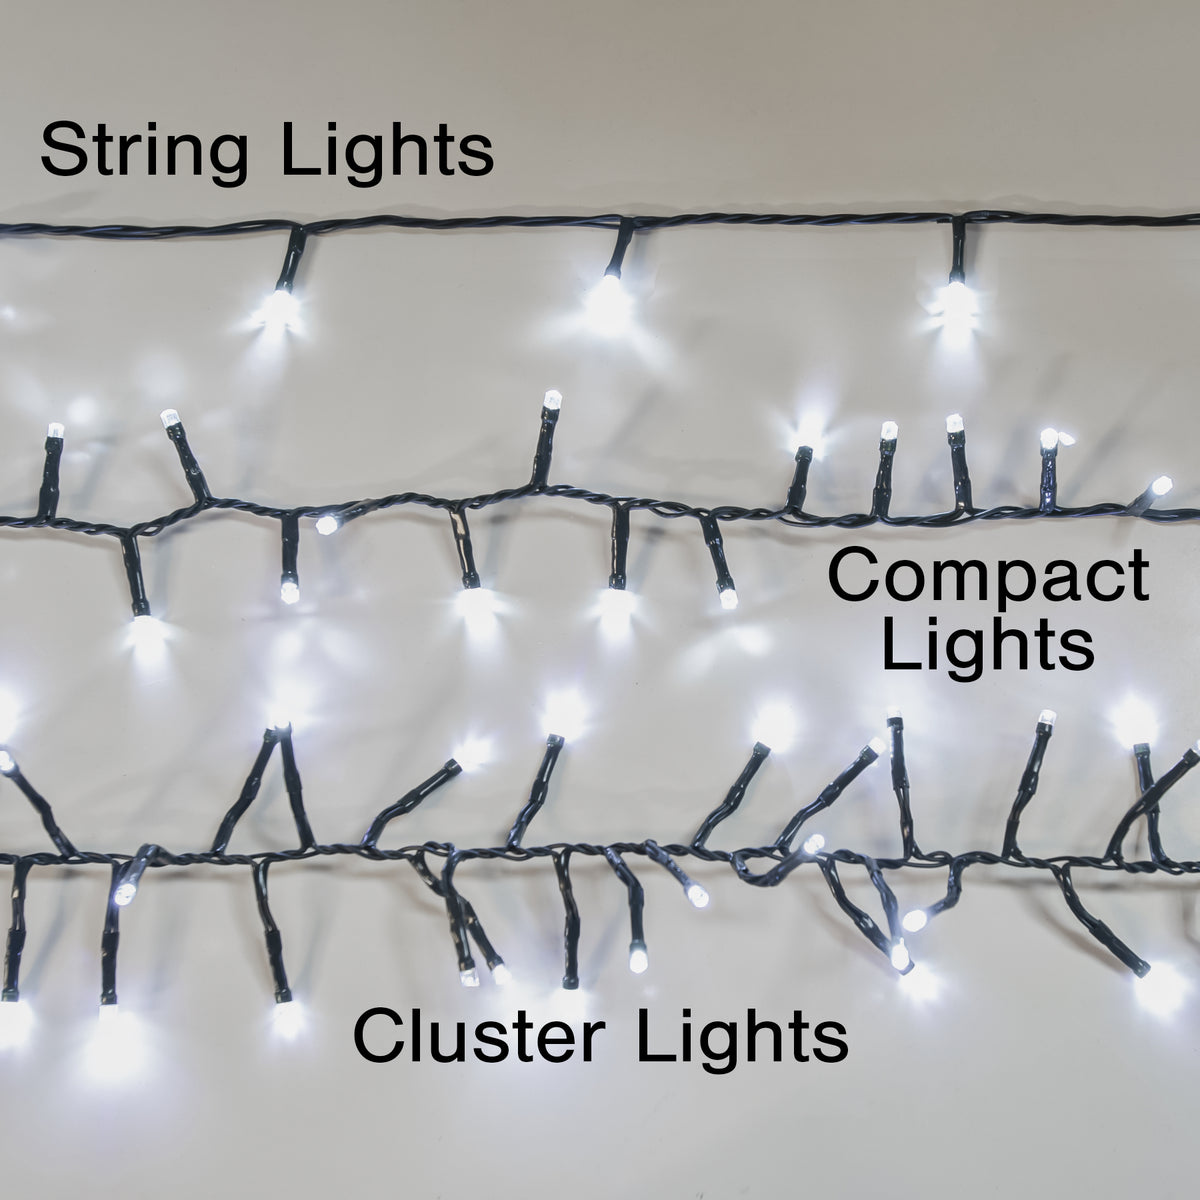 Warm White LED Multi-Function Christmas Compact Lights - 500, 1500, 3000